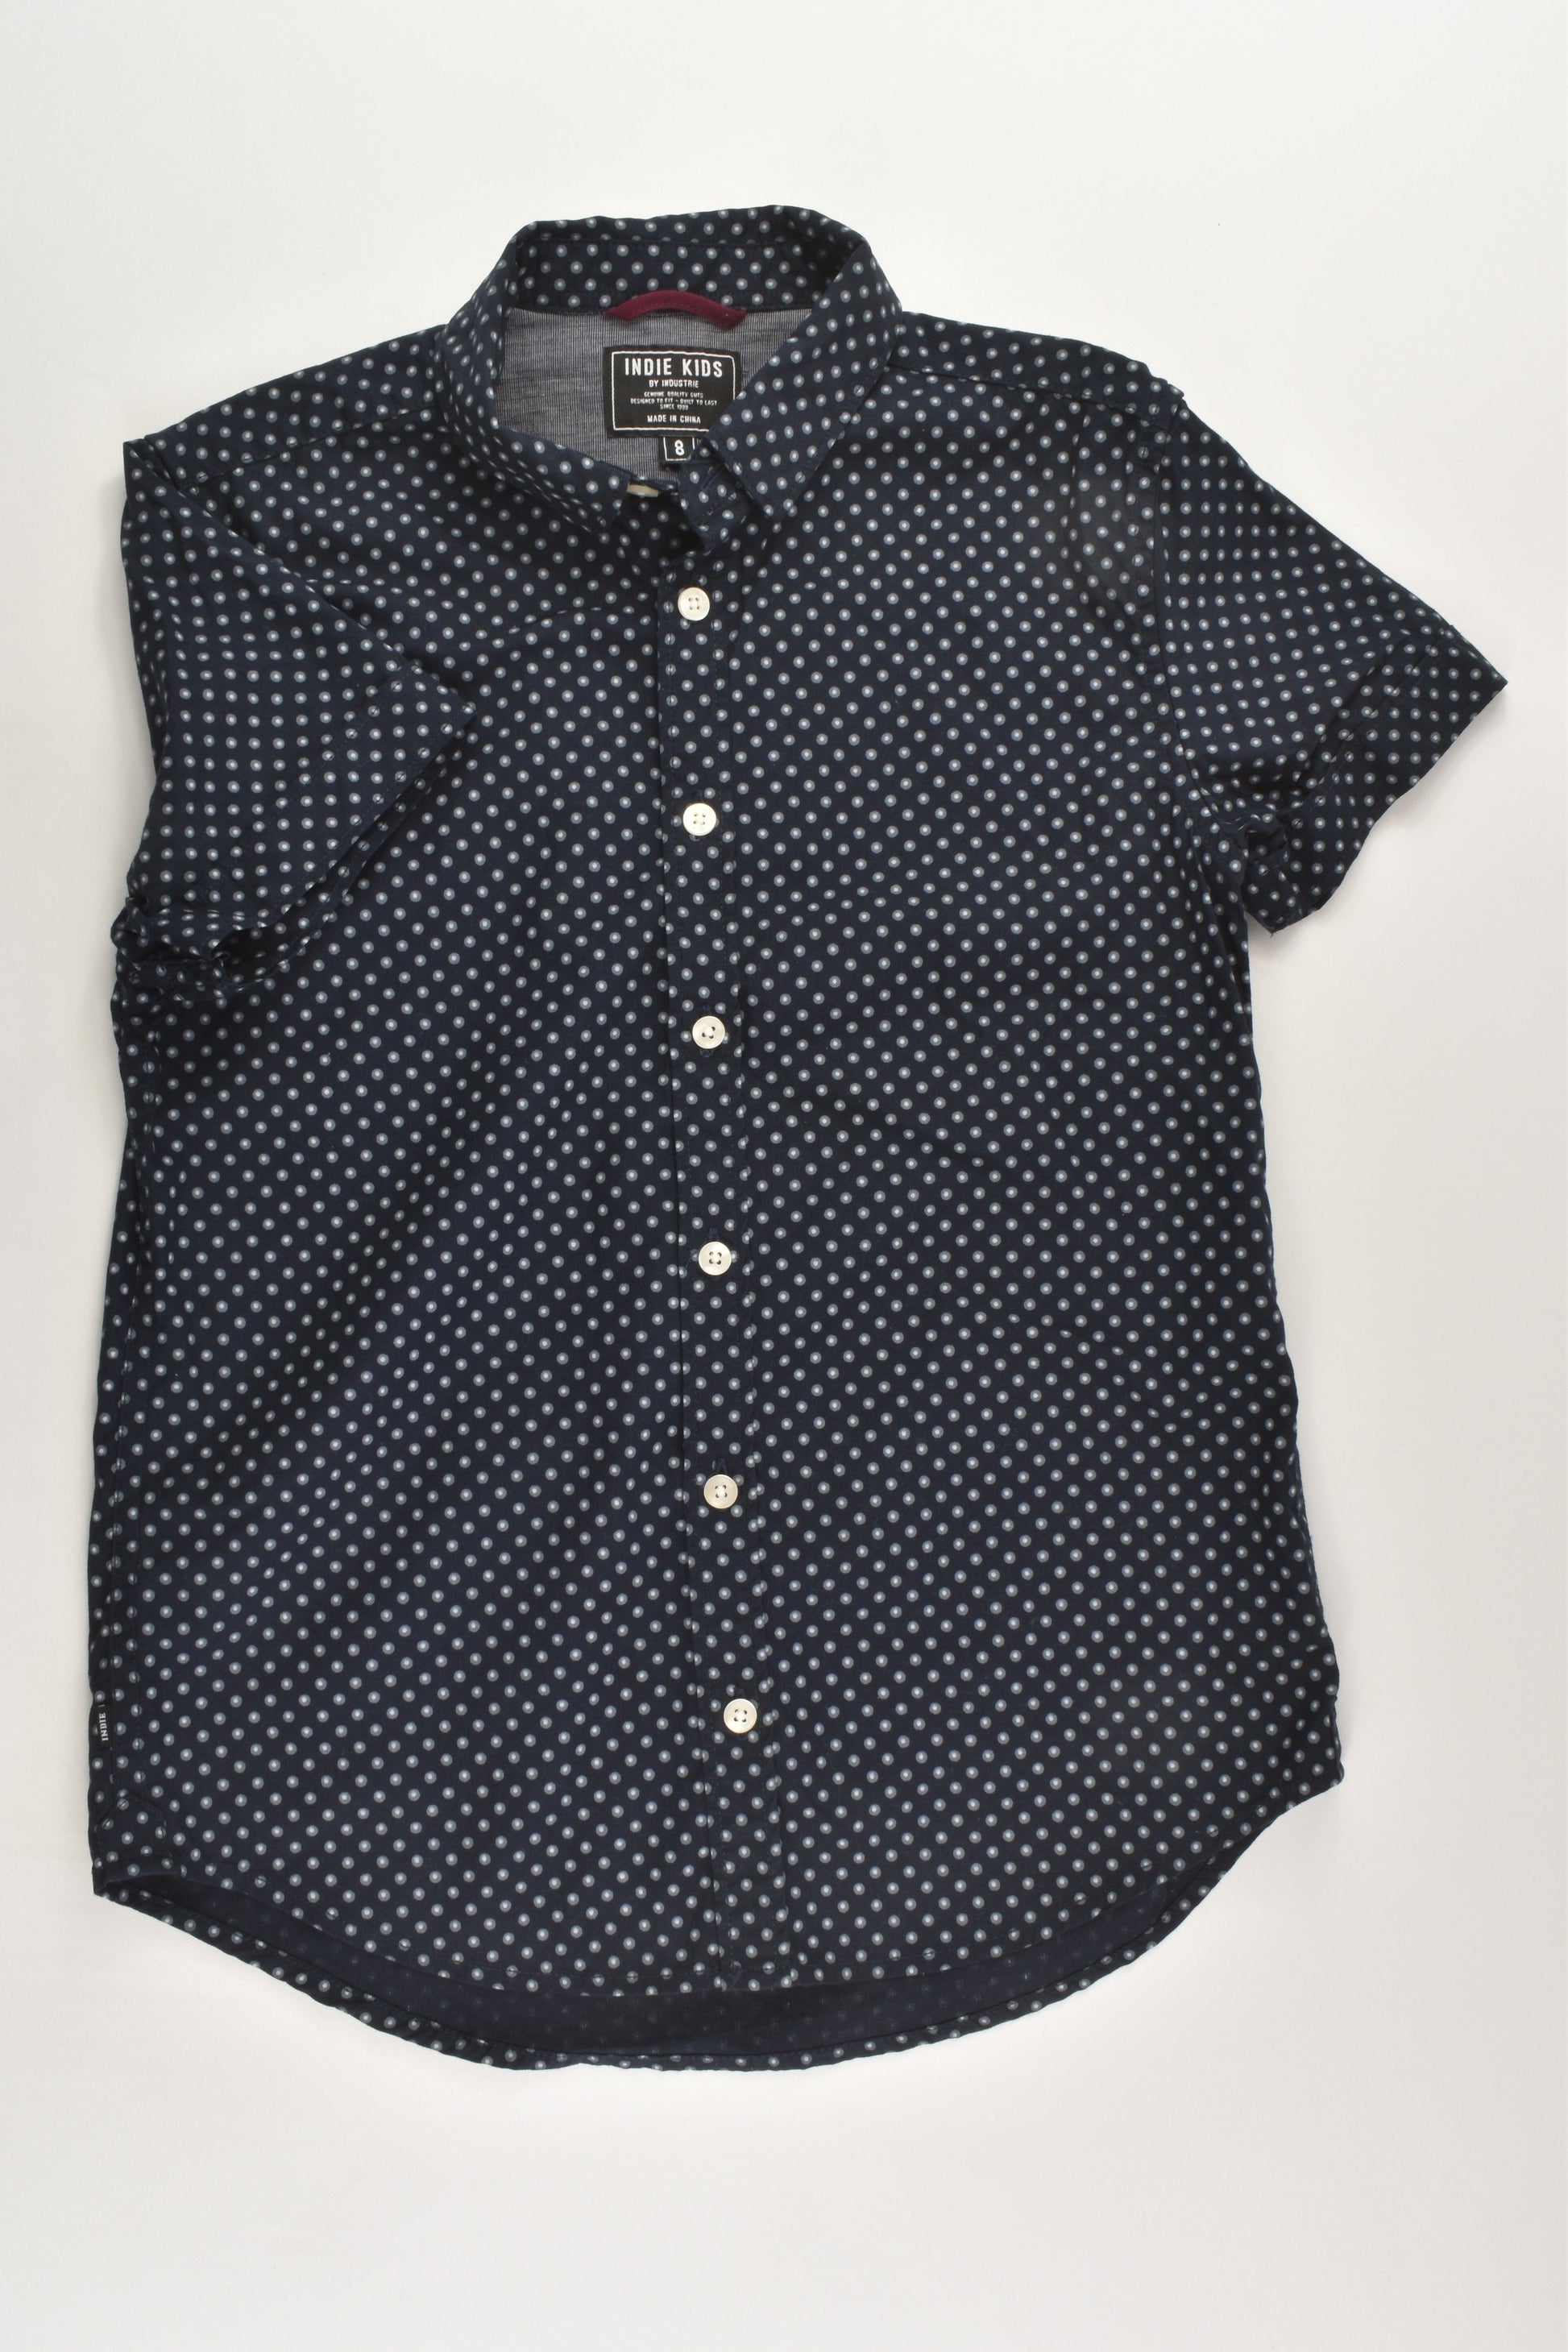 Indie Kids by Industrie Size 8 Collared Shirt